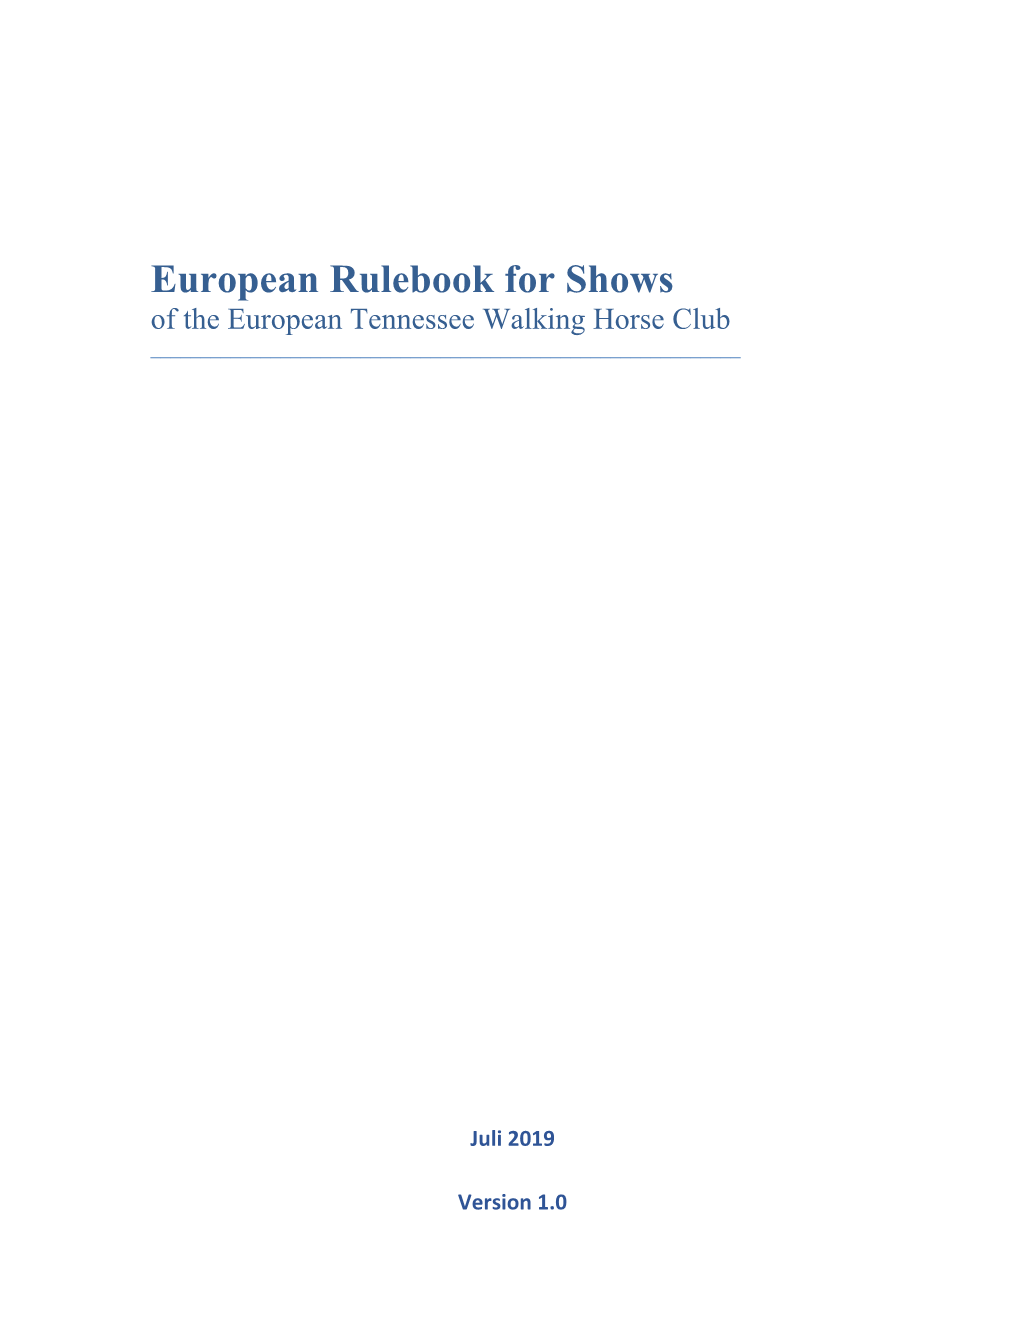 European Rulebook for Shows of the European Tennessee Walking Horse Club ______